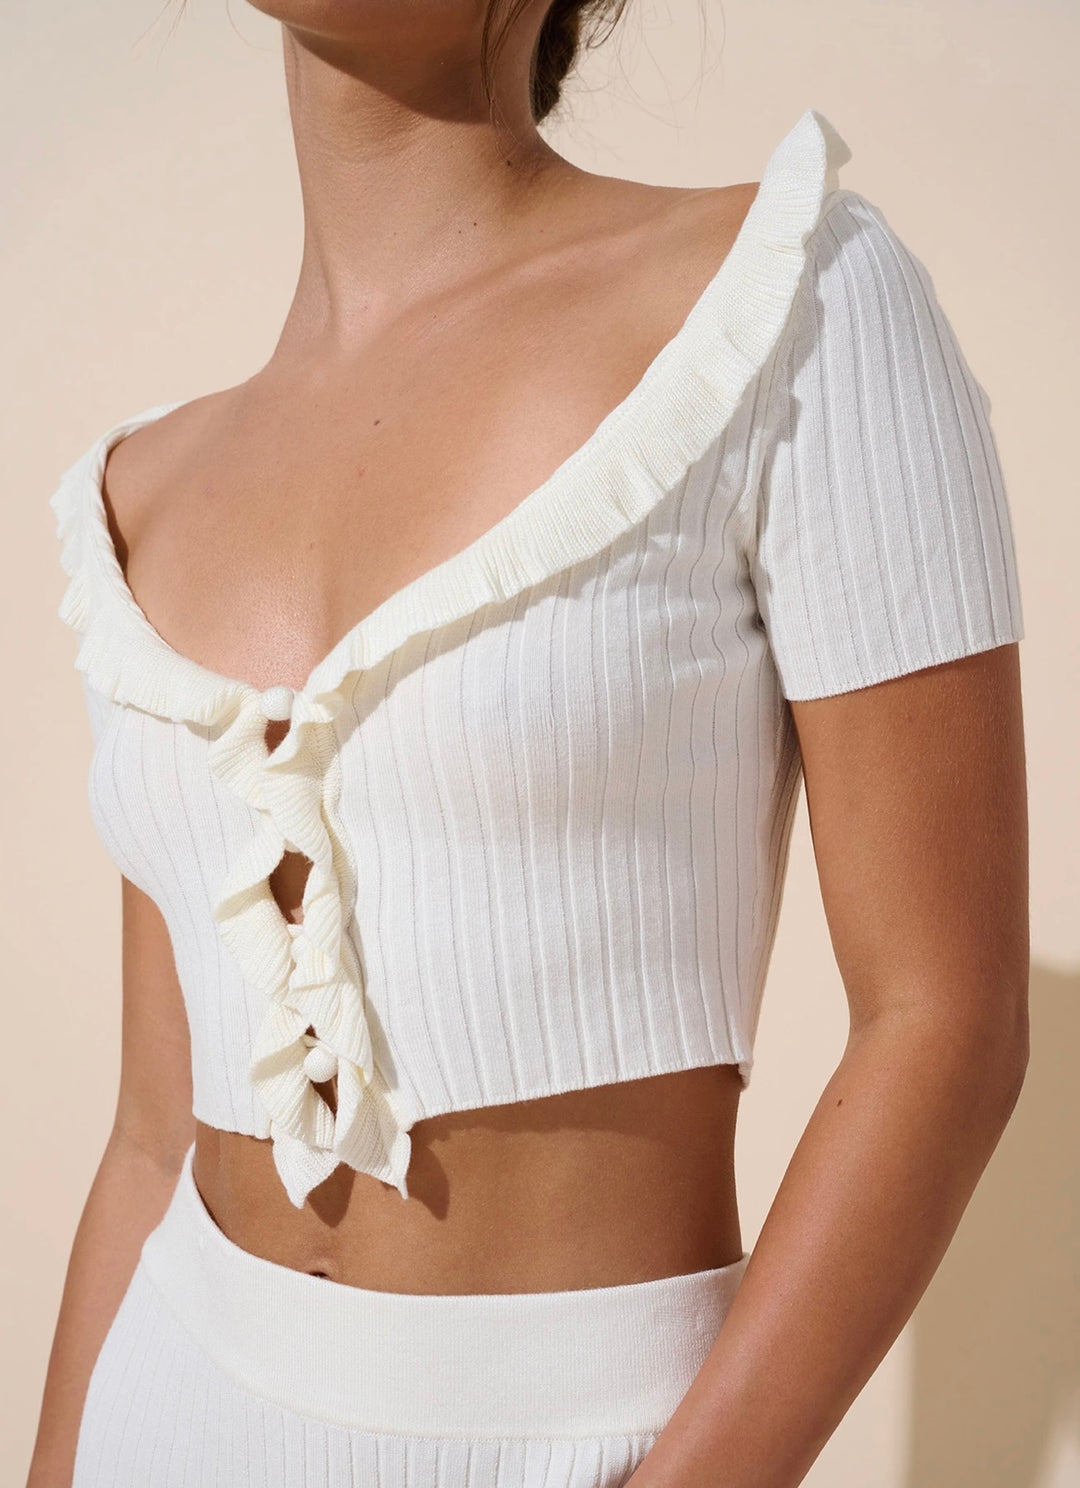 Off White Crop Top With Frill Detail - Size Medium